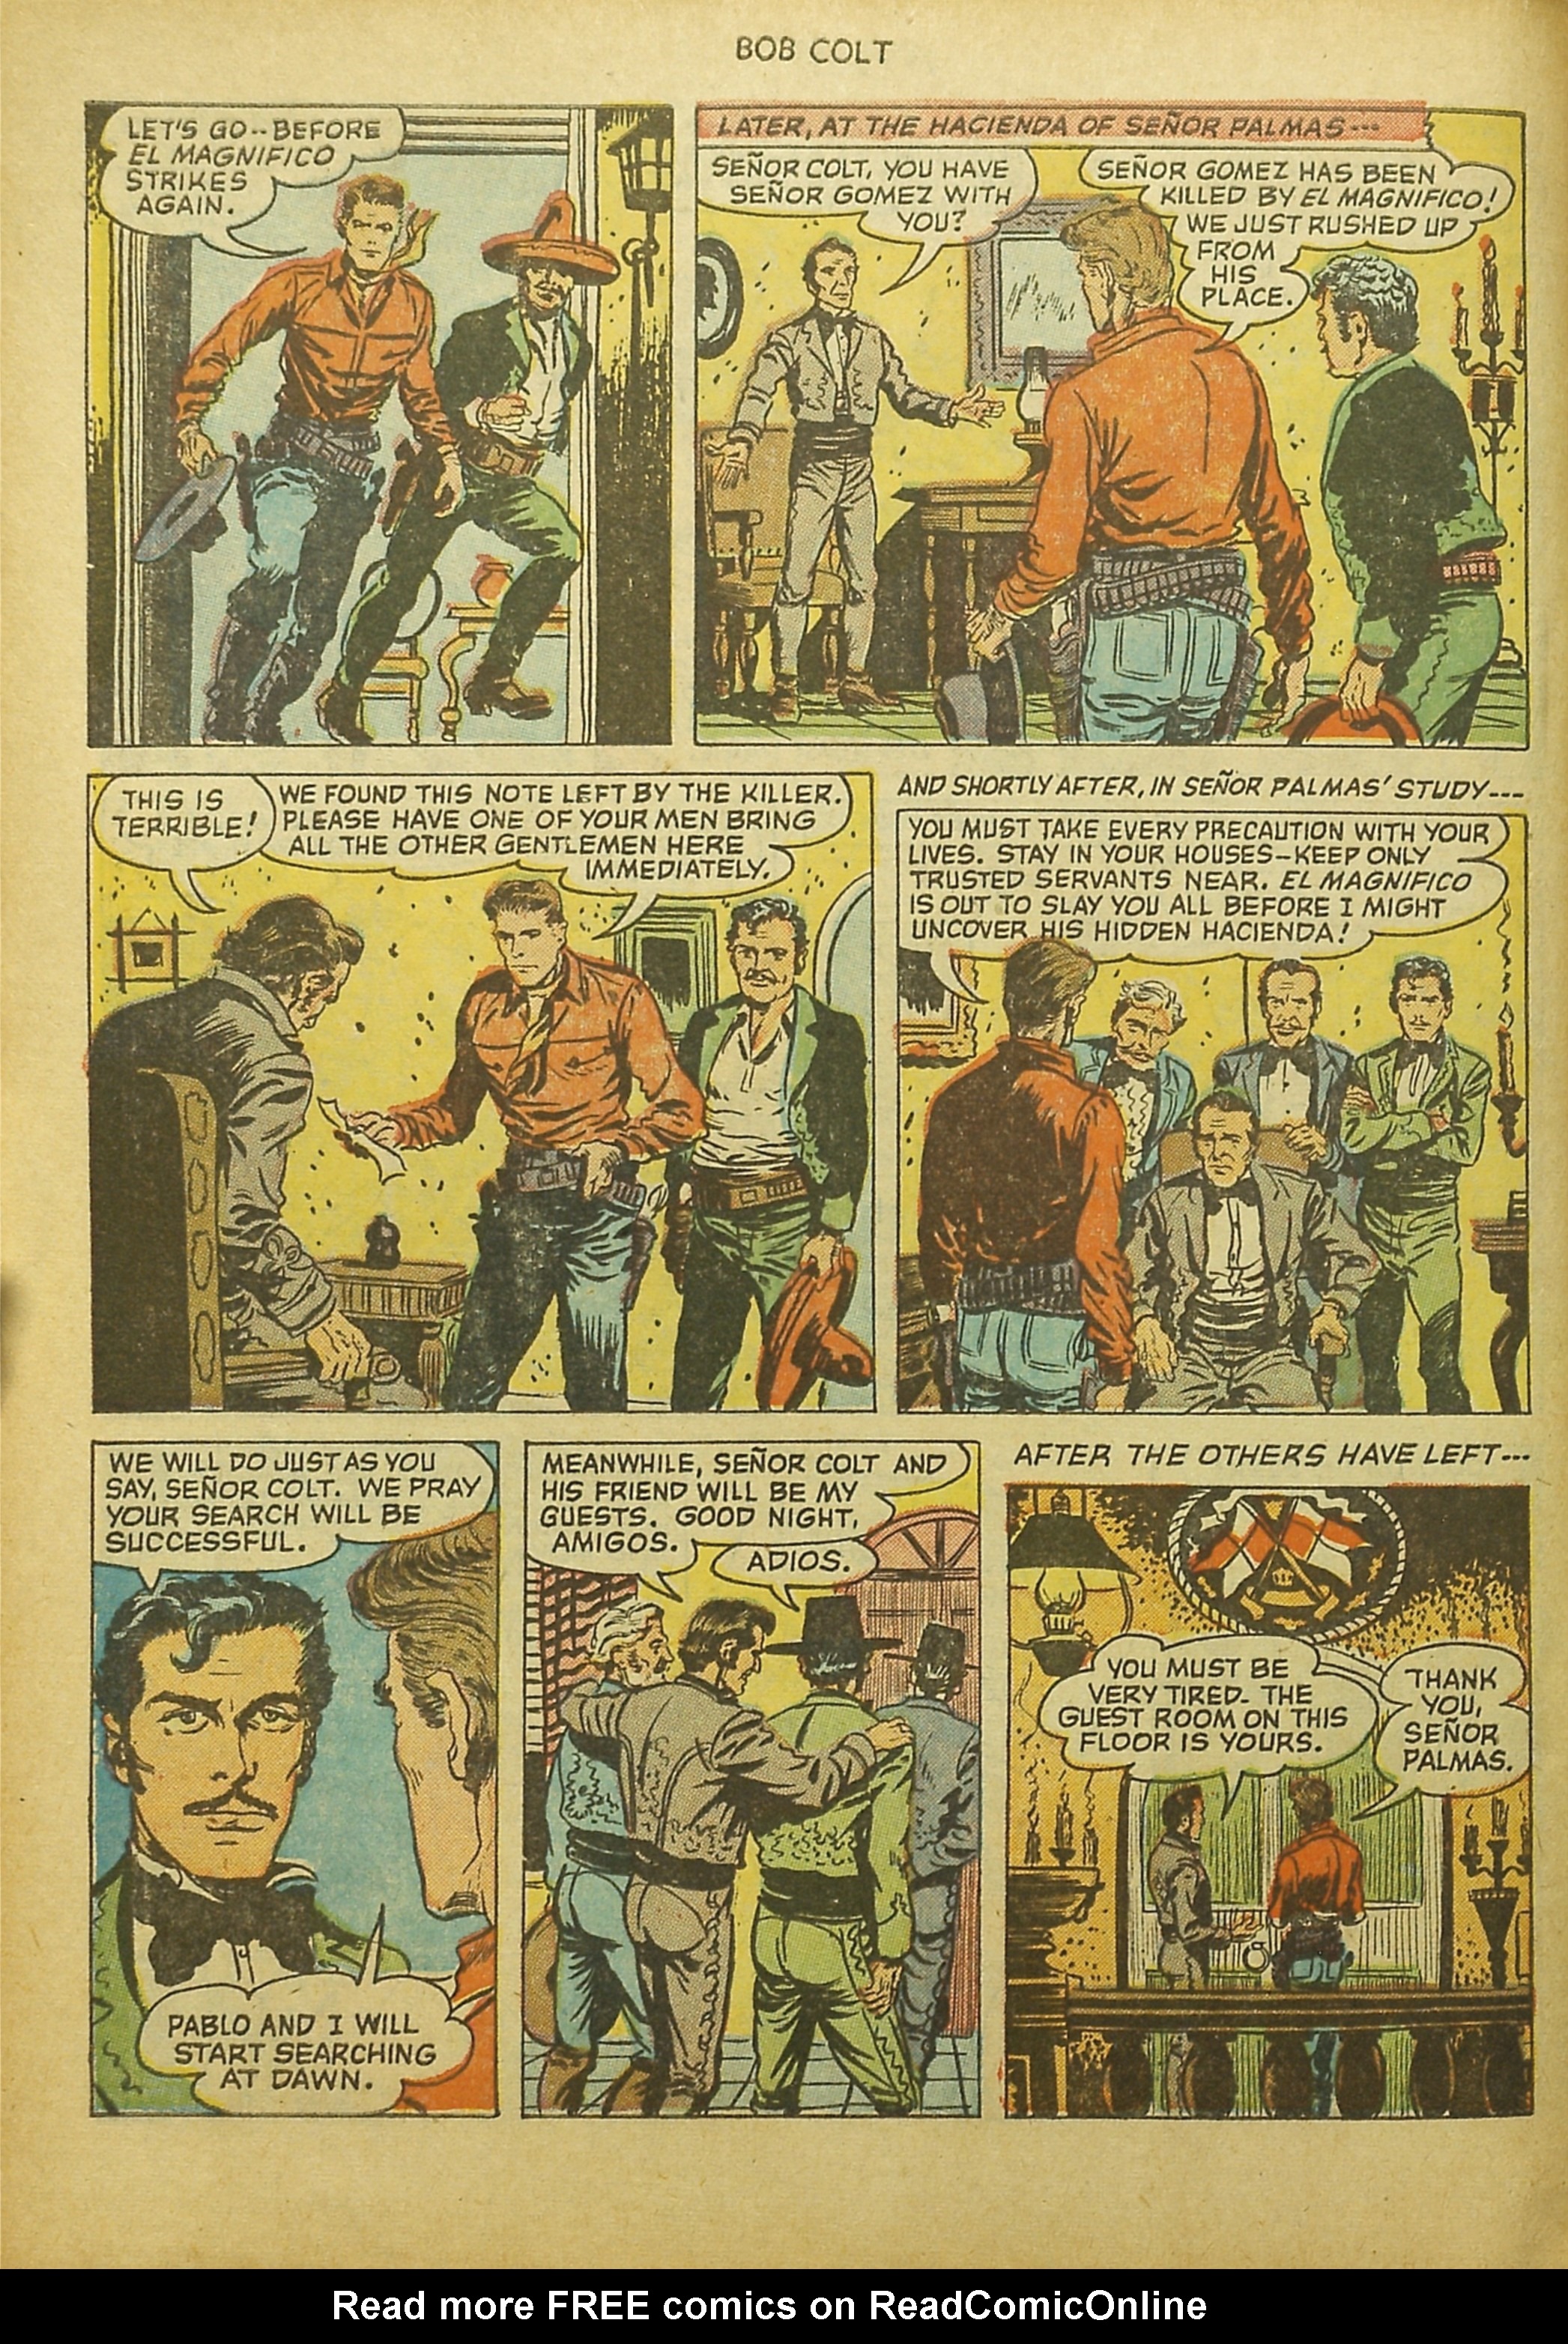 Read online Bob Colt Western comic -  Issue #9 - 8